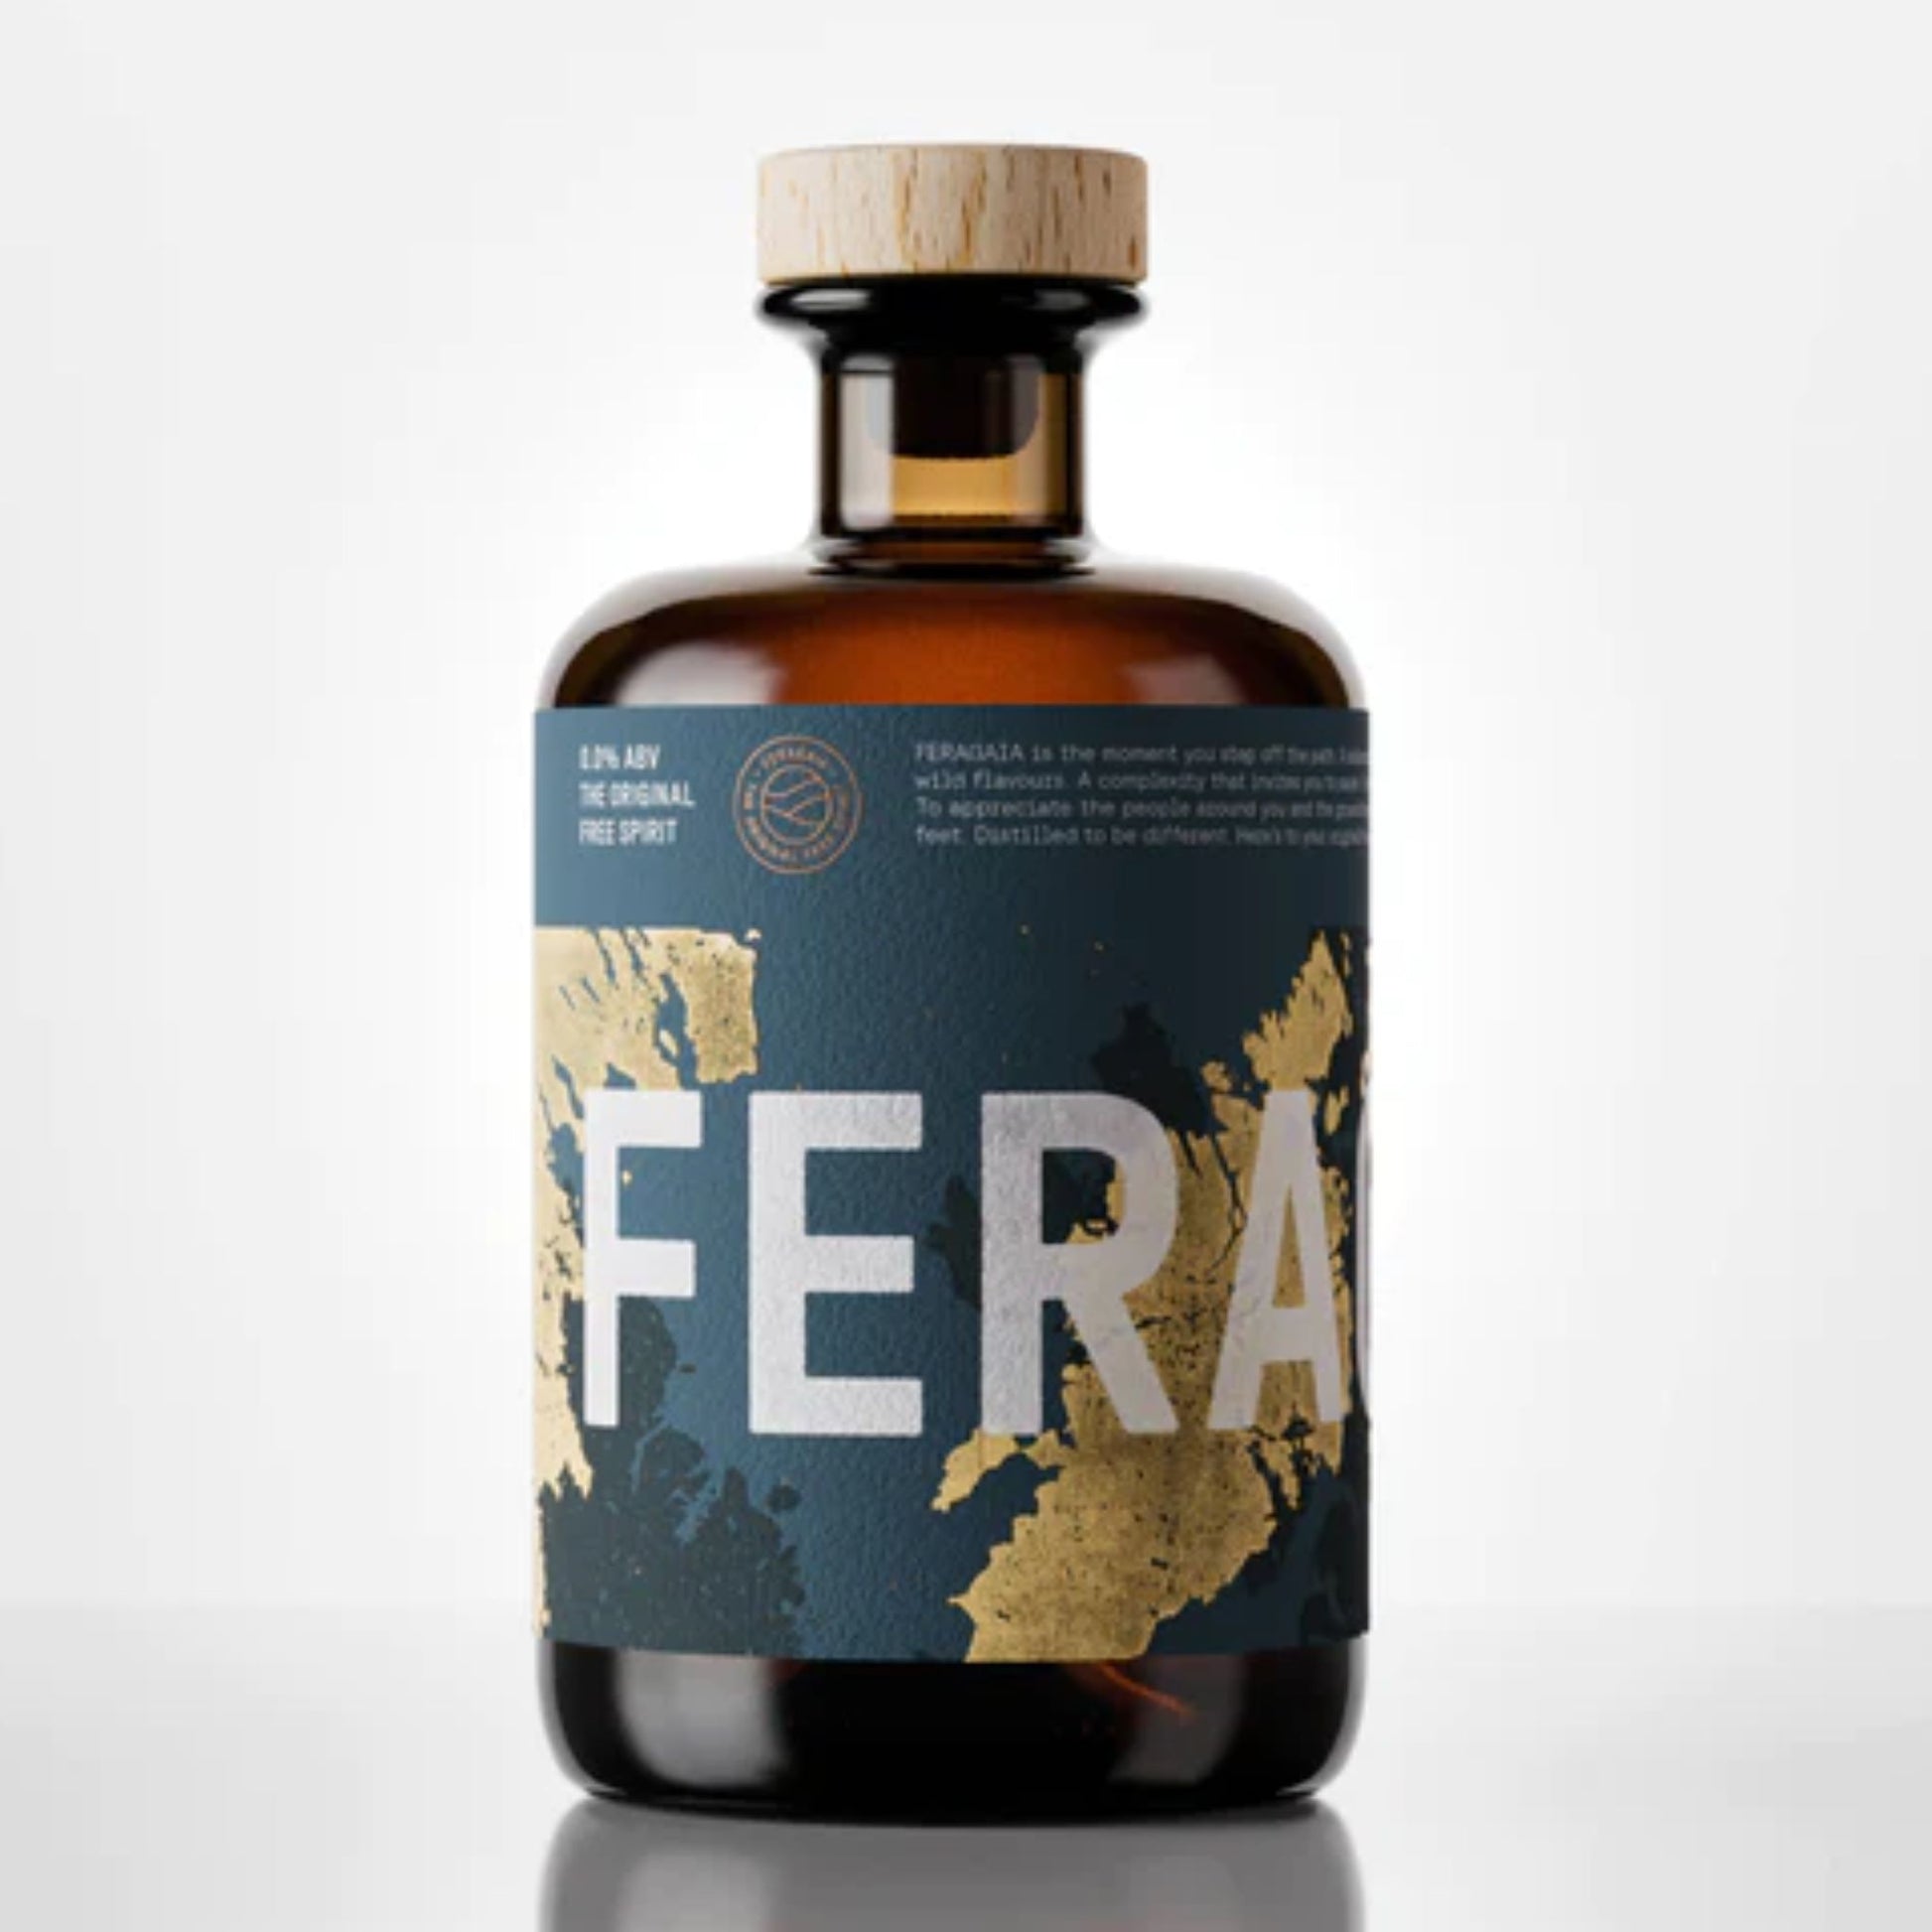 Feragaia distilled alcohol-free spirit is available at Knyota Non-Alcoholic Drinks.